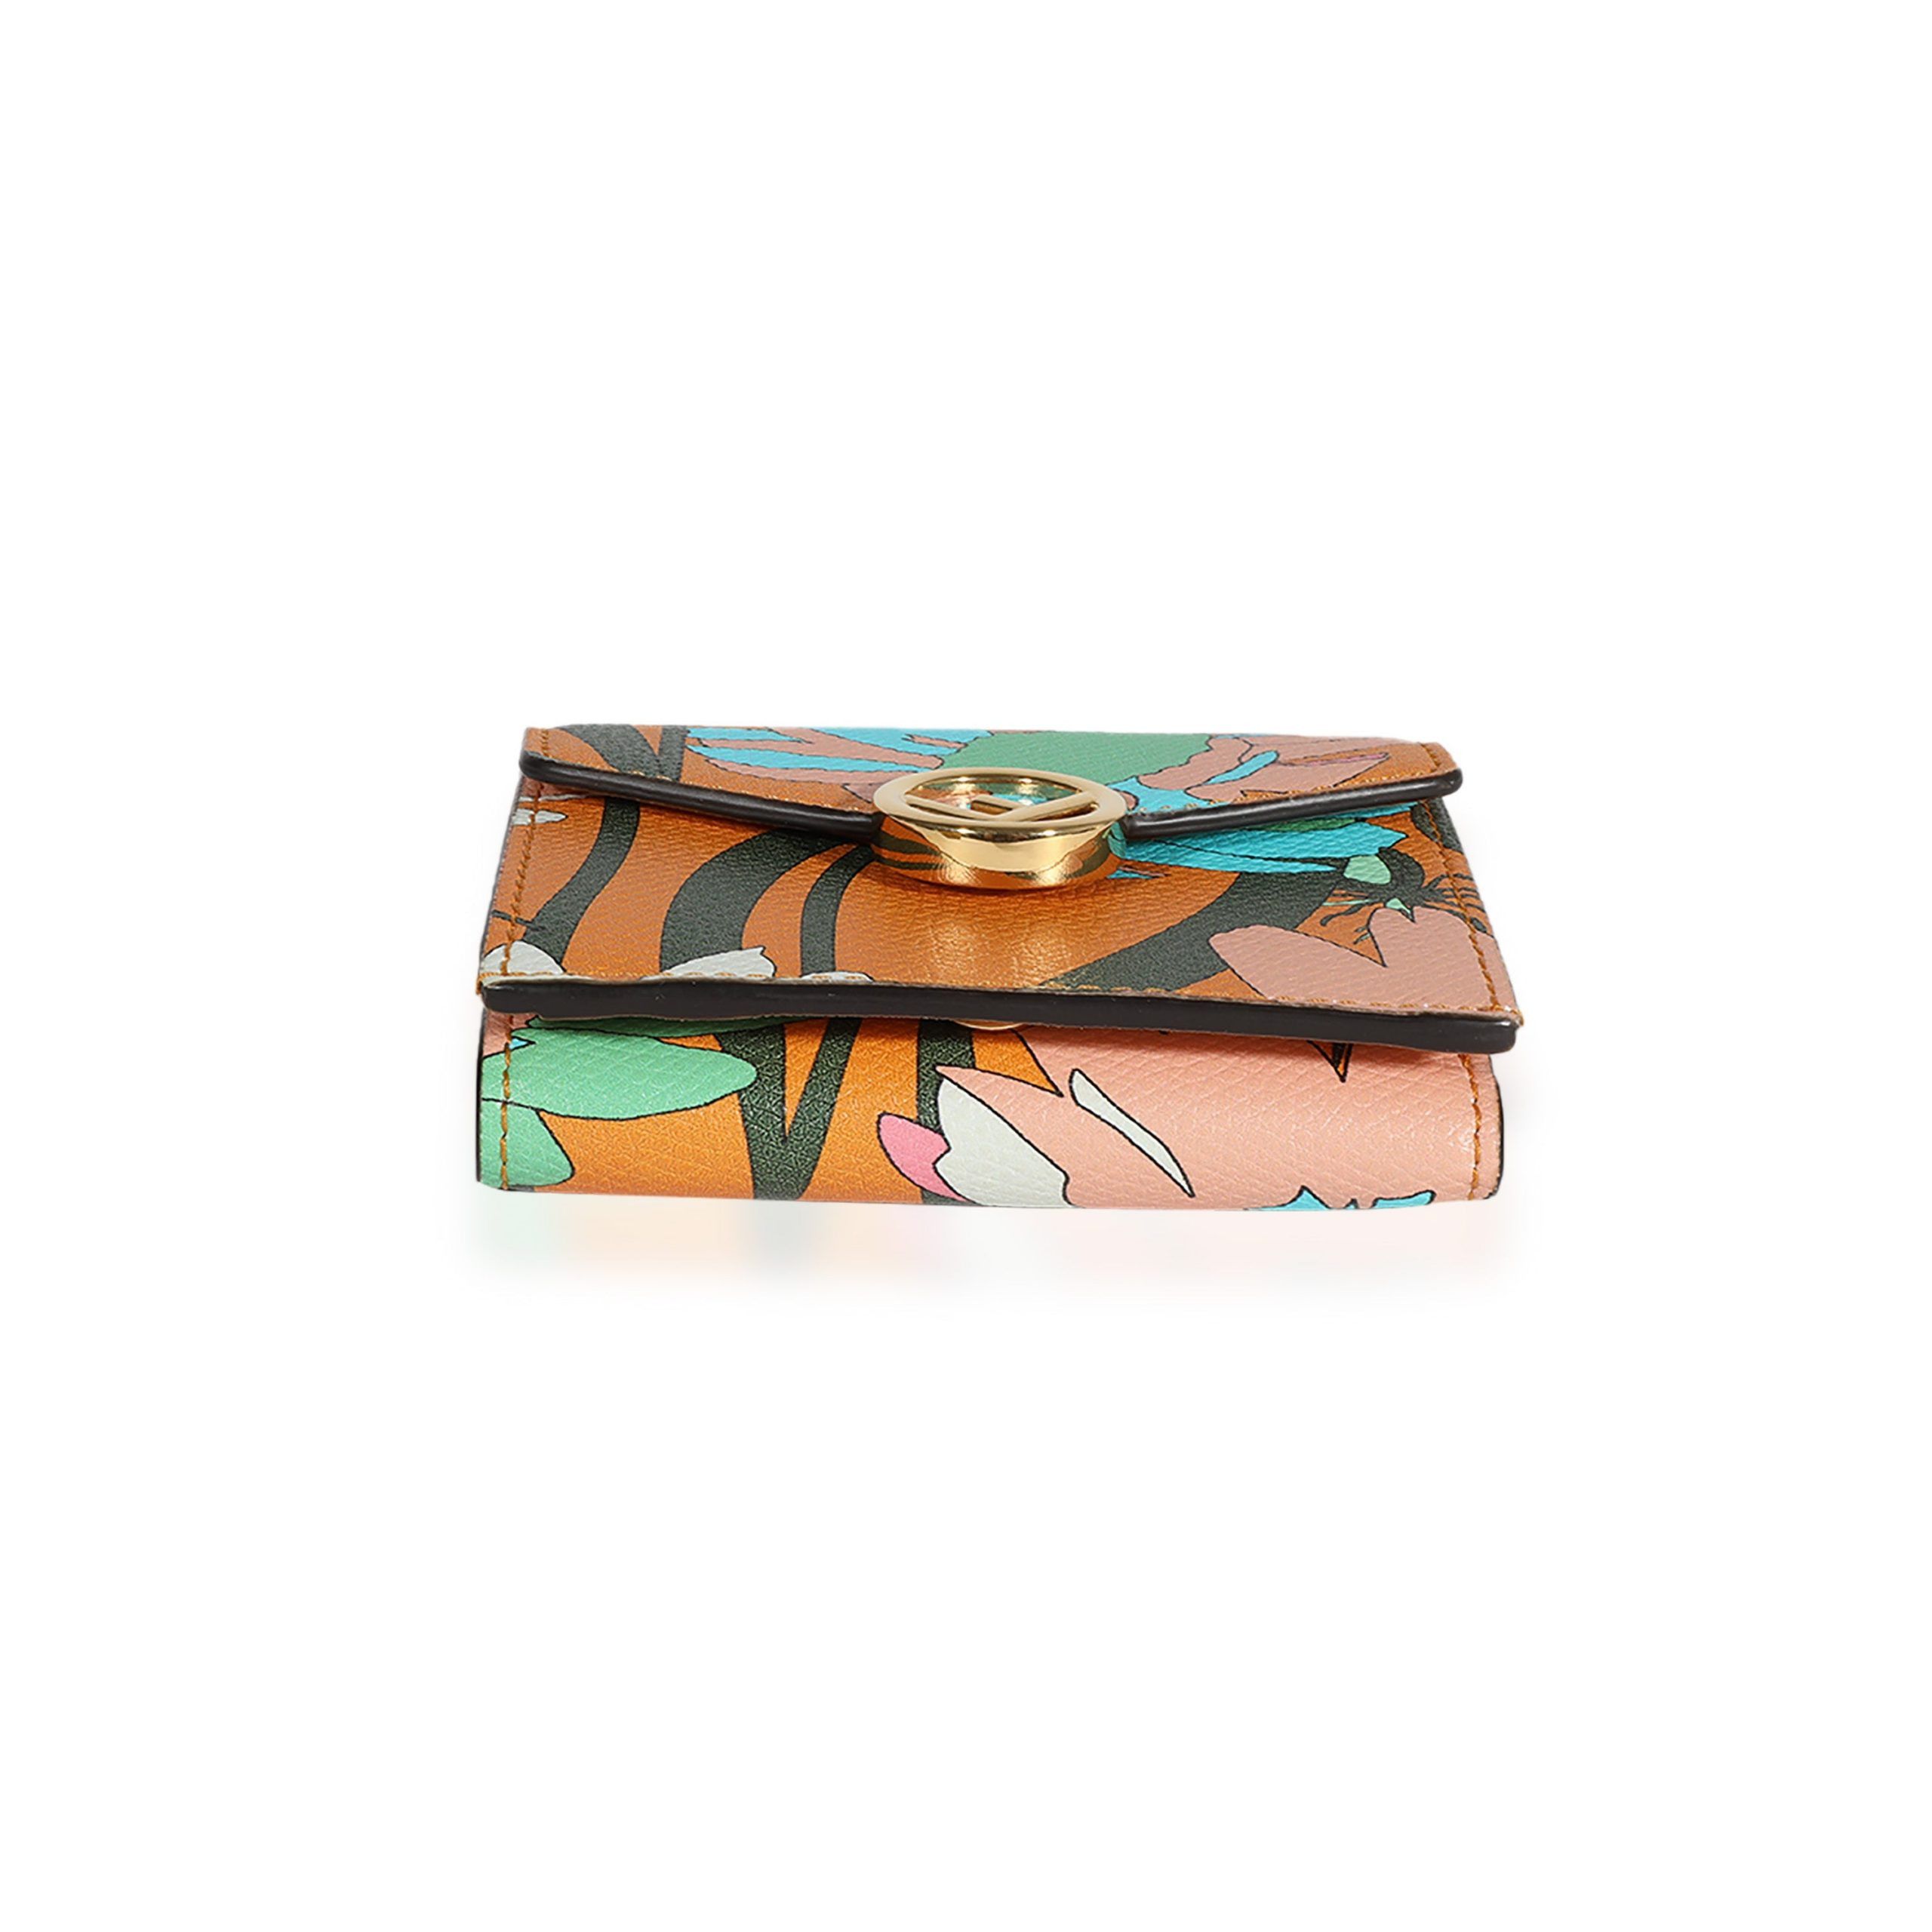 Fendi Fendi Multicolor Floral Printed Leather Micro Trifold Wallet Size ONE SIZE - 5 Preview